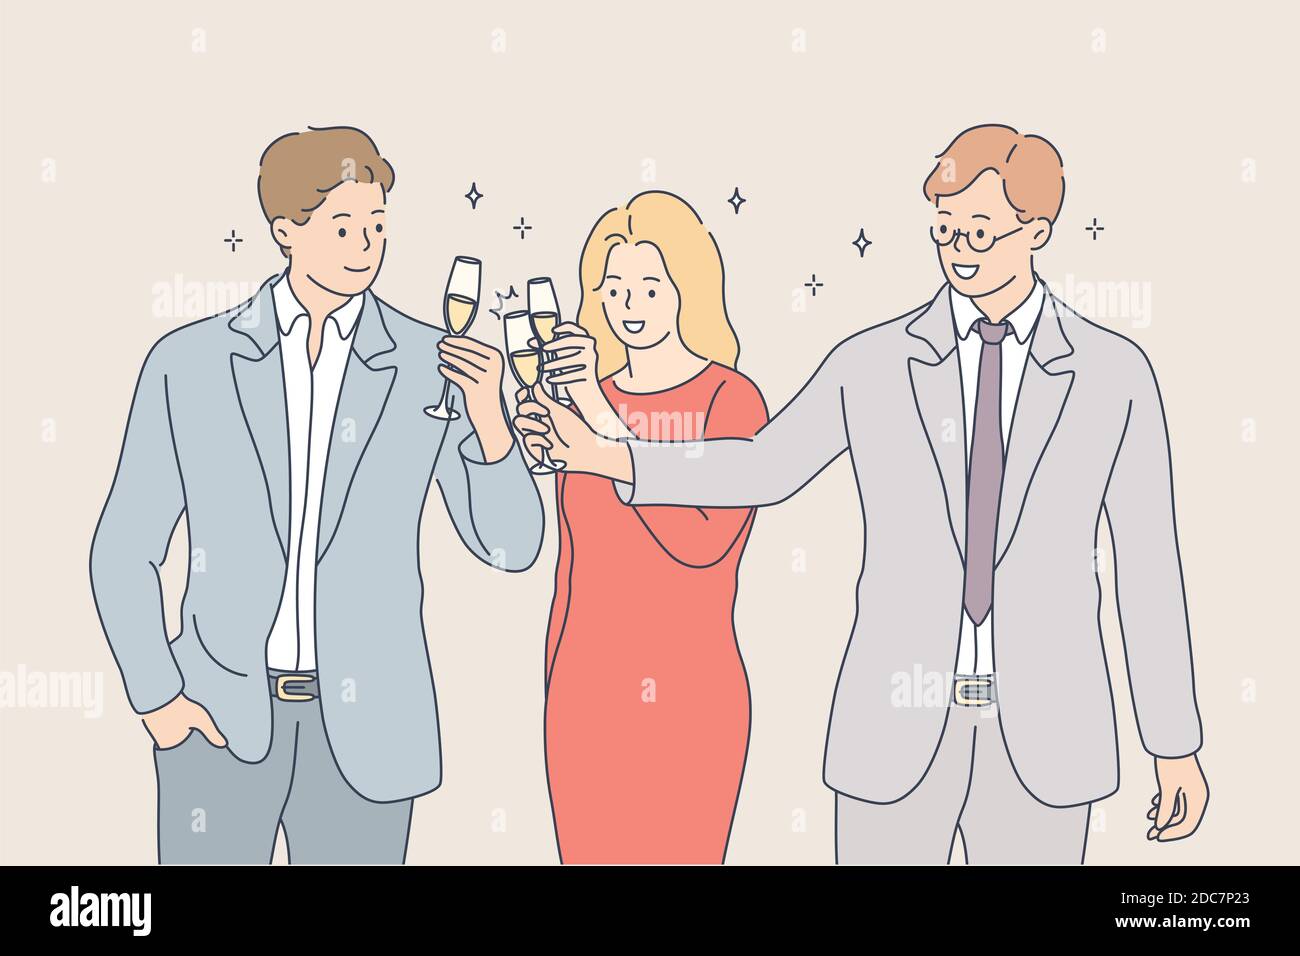 Business, team, celebration, alcohol, success concept. Young crew of happy excited businessmen and woman partners celebrating completed startup projec Stock Vector